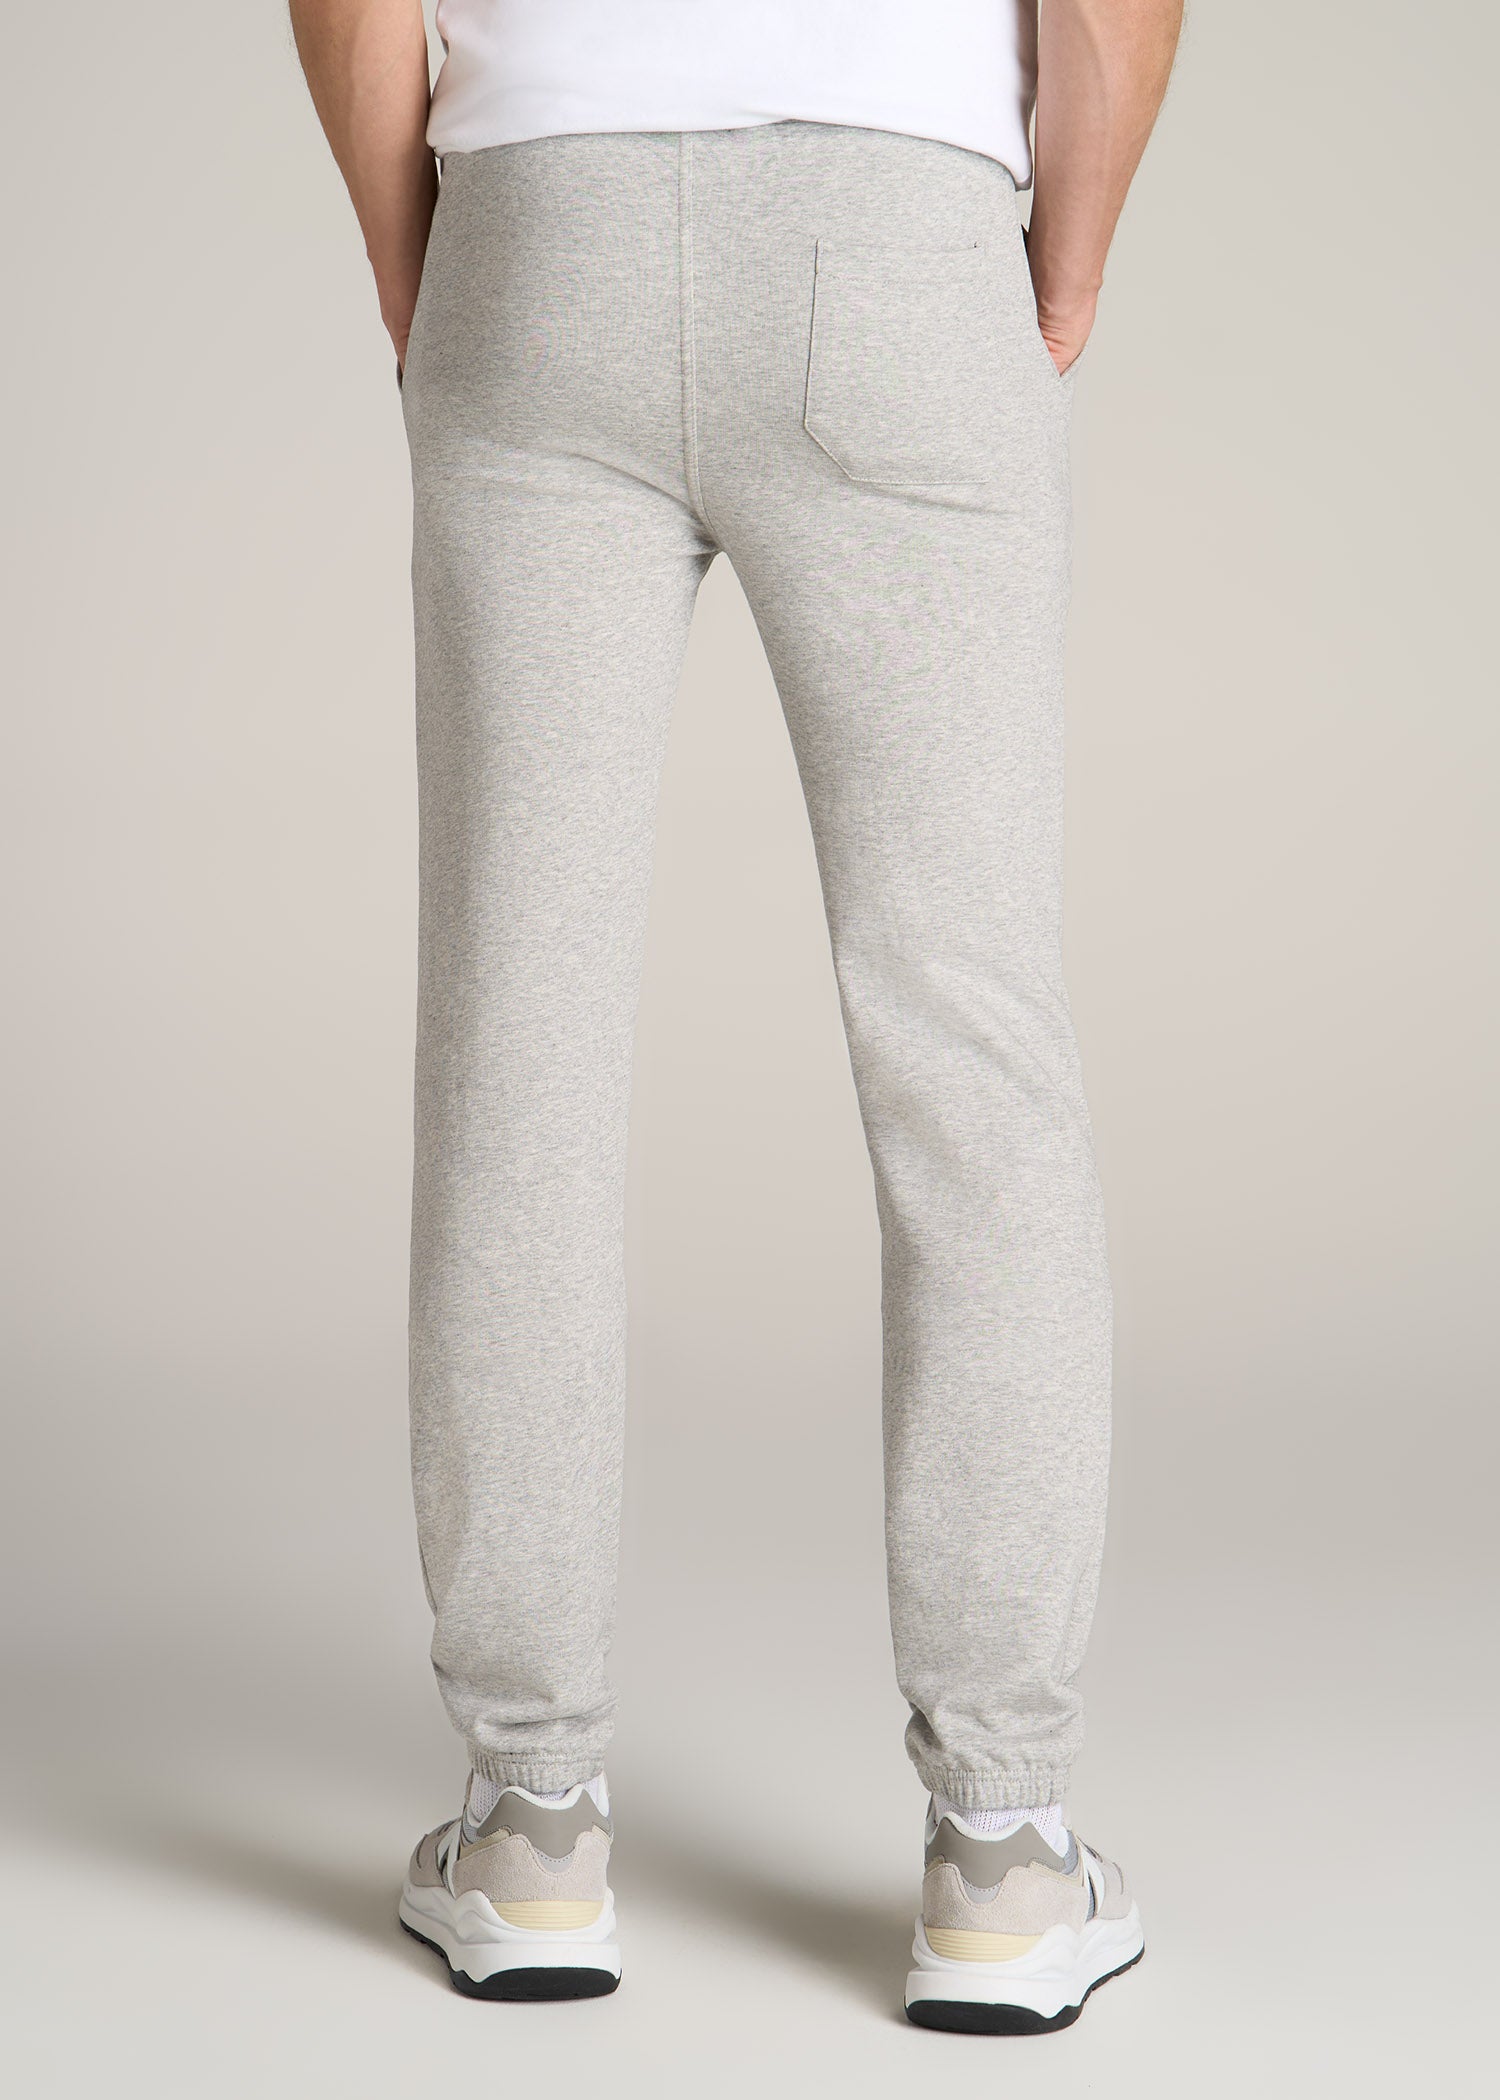 Men's Tall French Terry Sweatpants: Grey Mix Sweatpants – American Tall